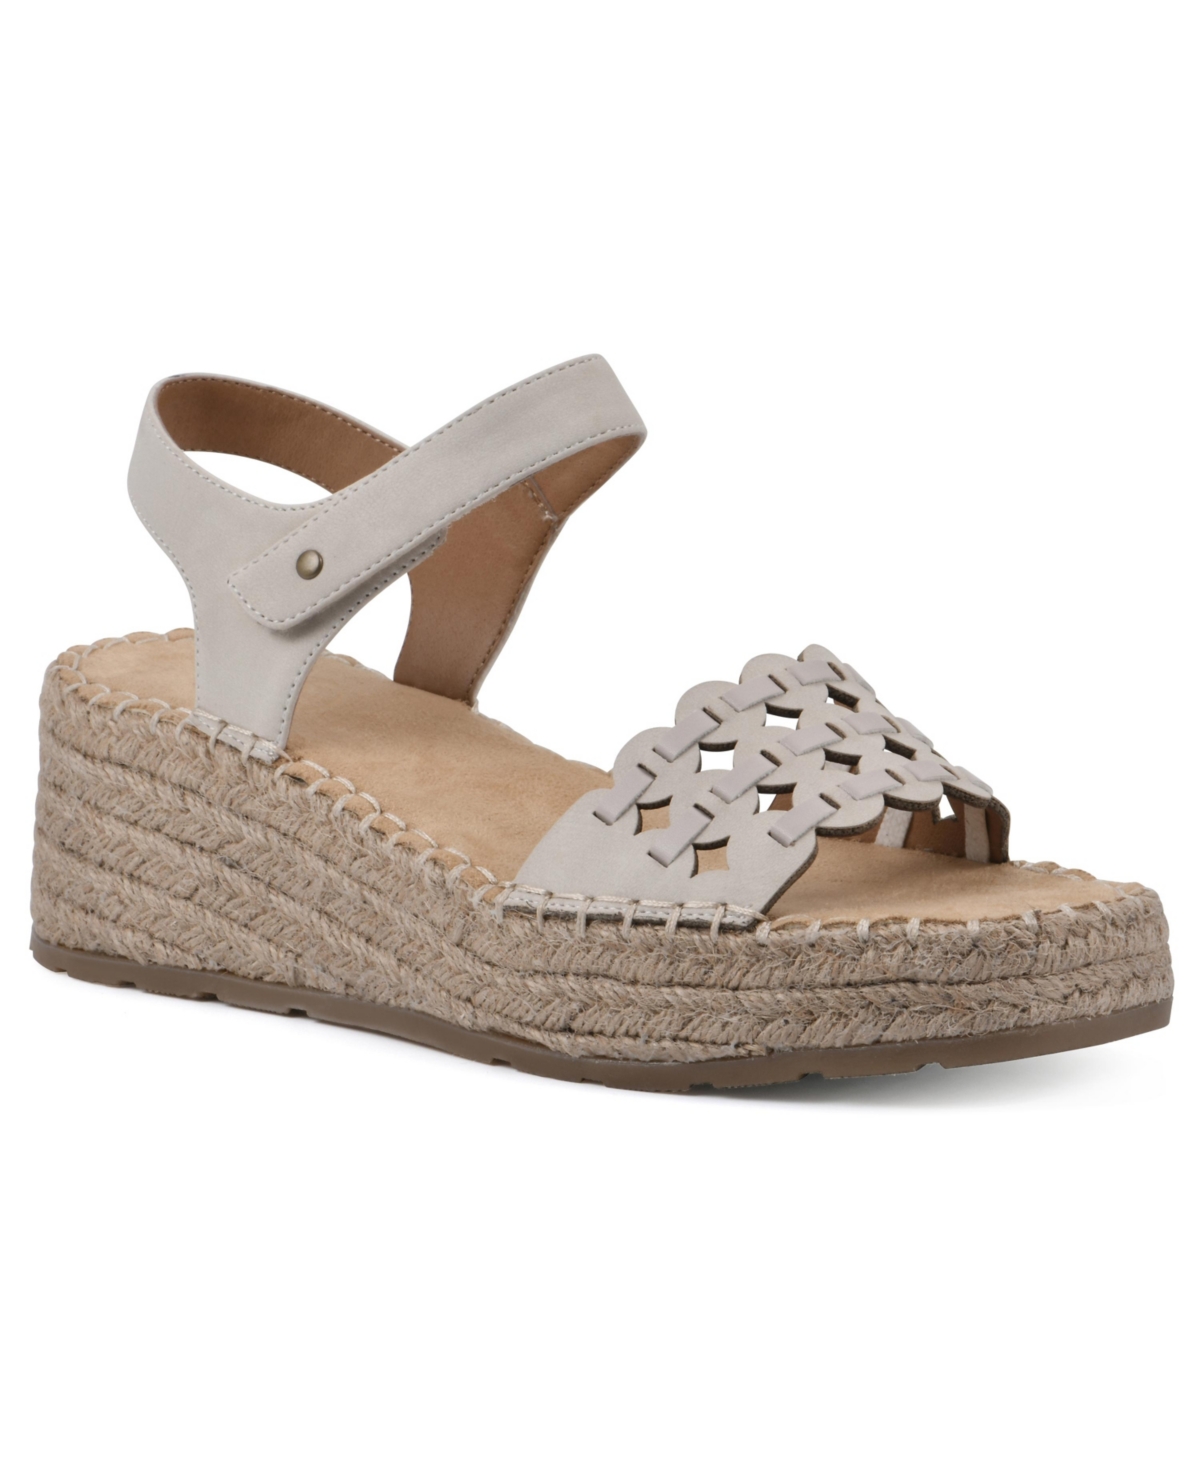 White Mountain Stride Espadrille Wedge Sandals In Eggshell Multi Smooth